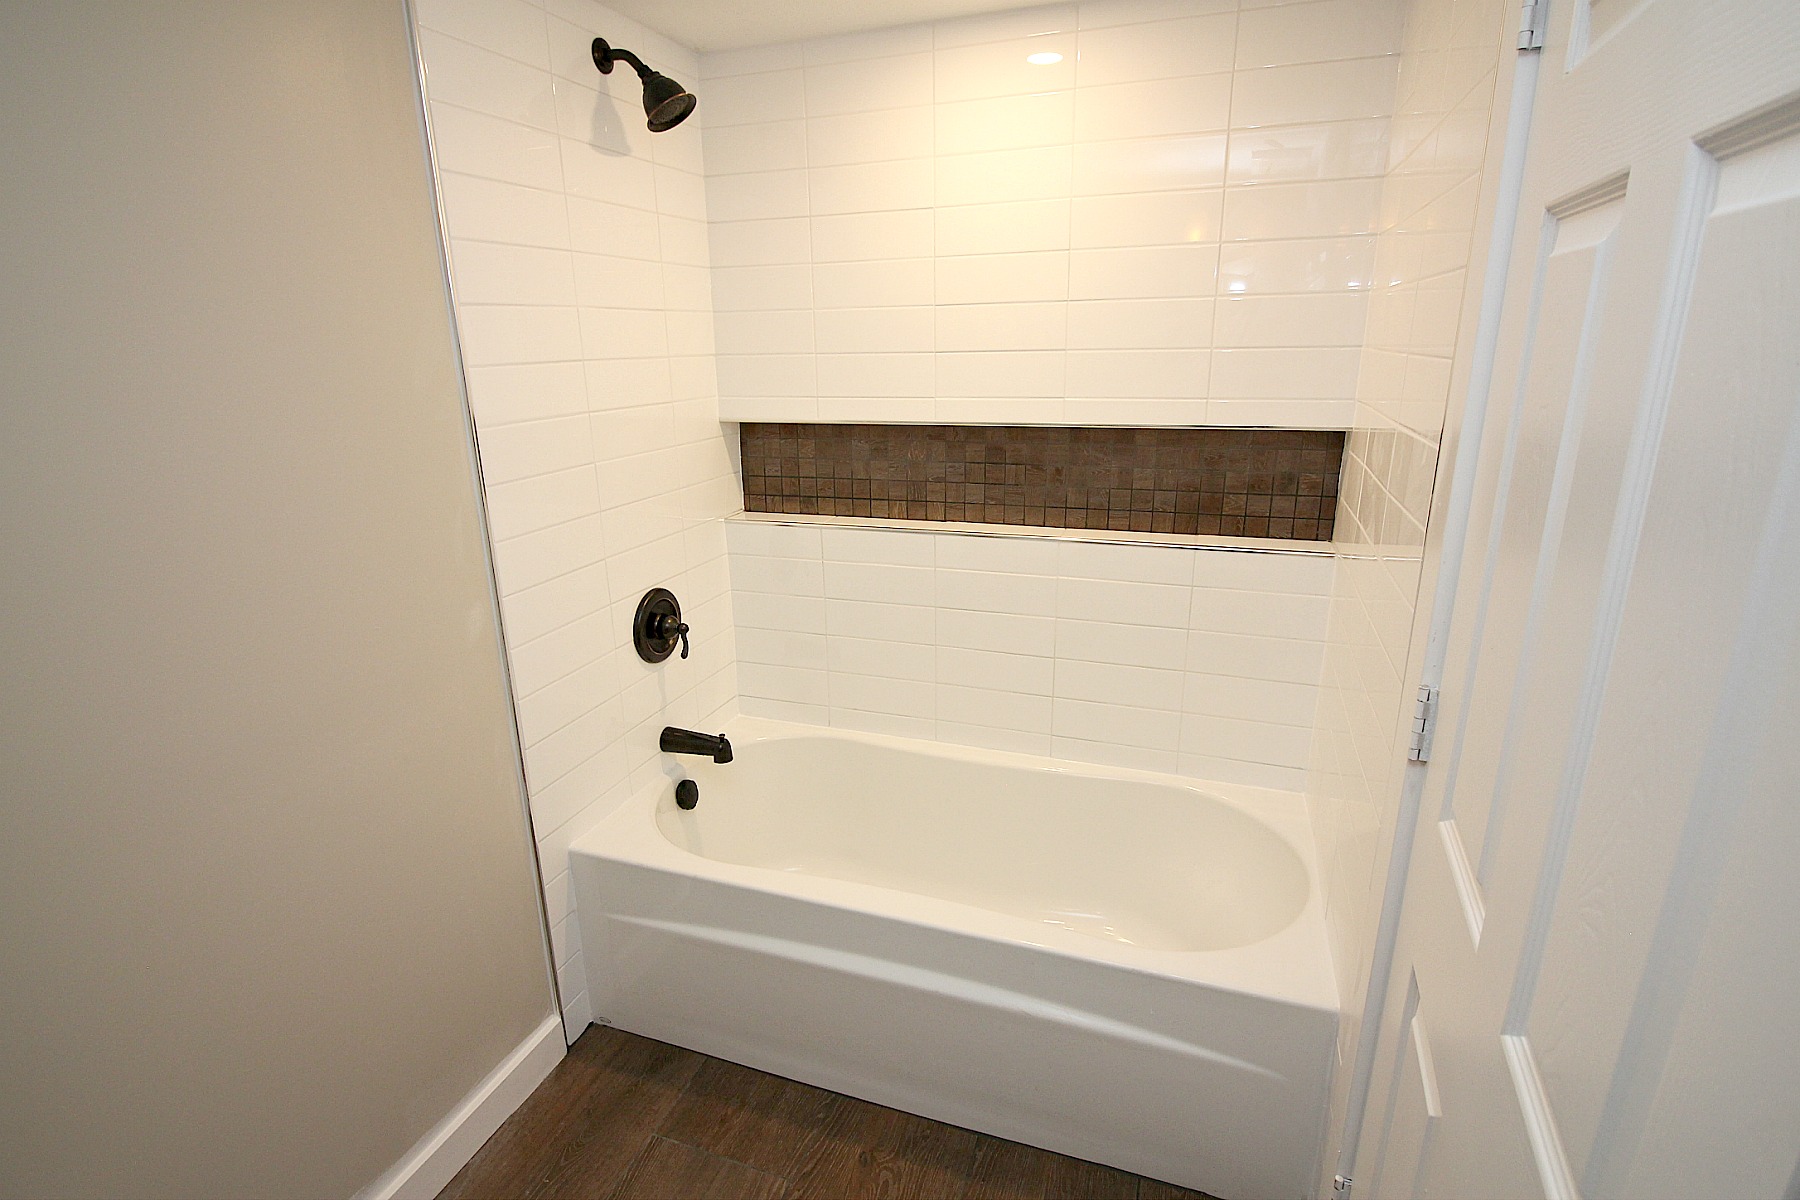 Tub And Shower Combos Pictures Ideas Tips From Hgtv Hgtv